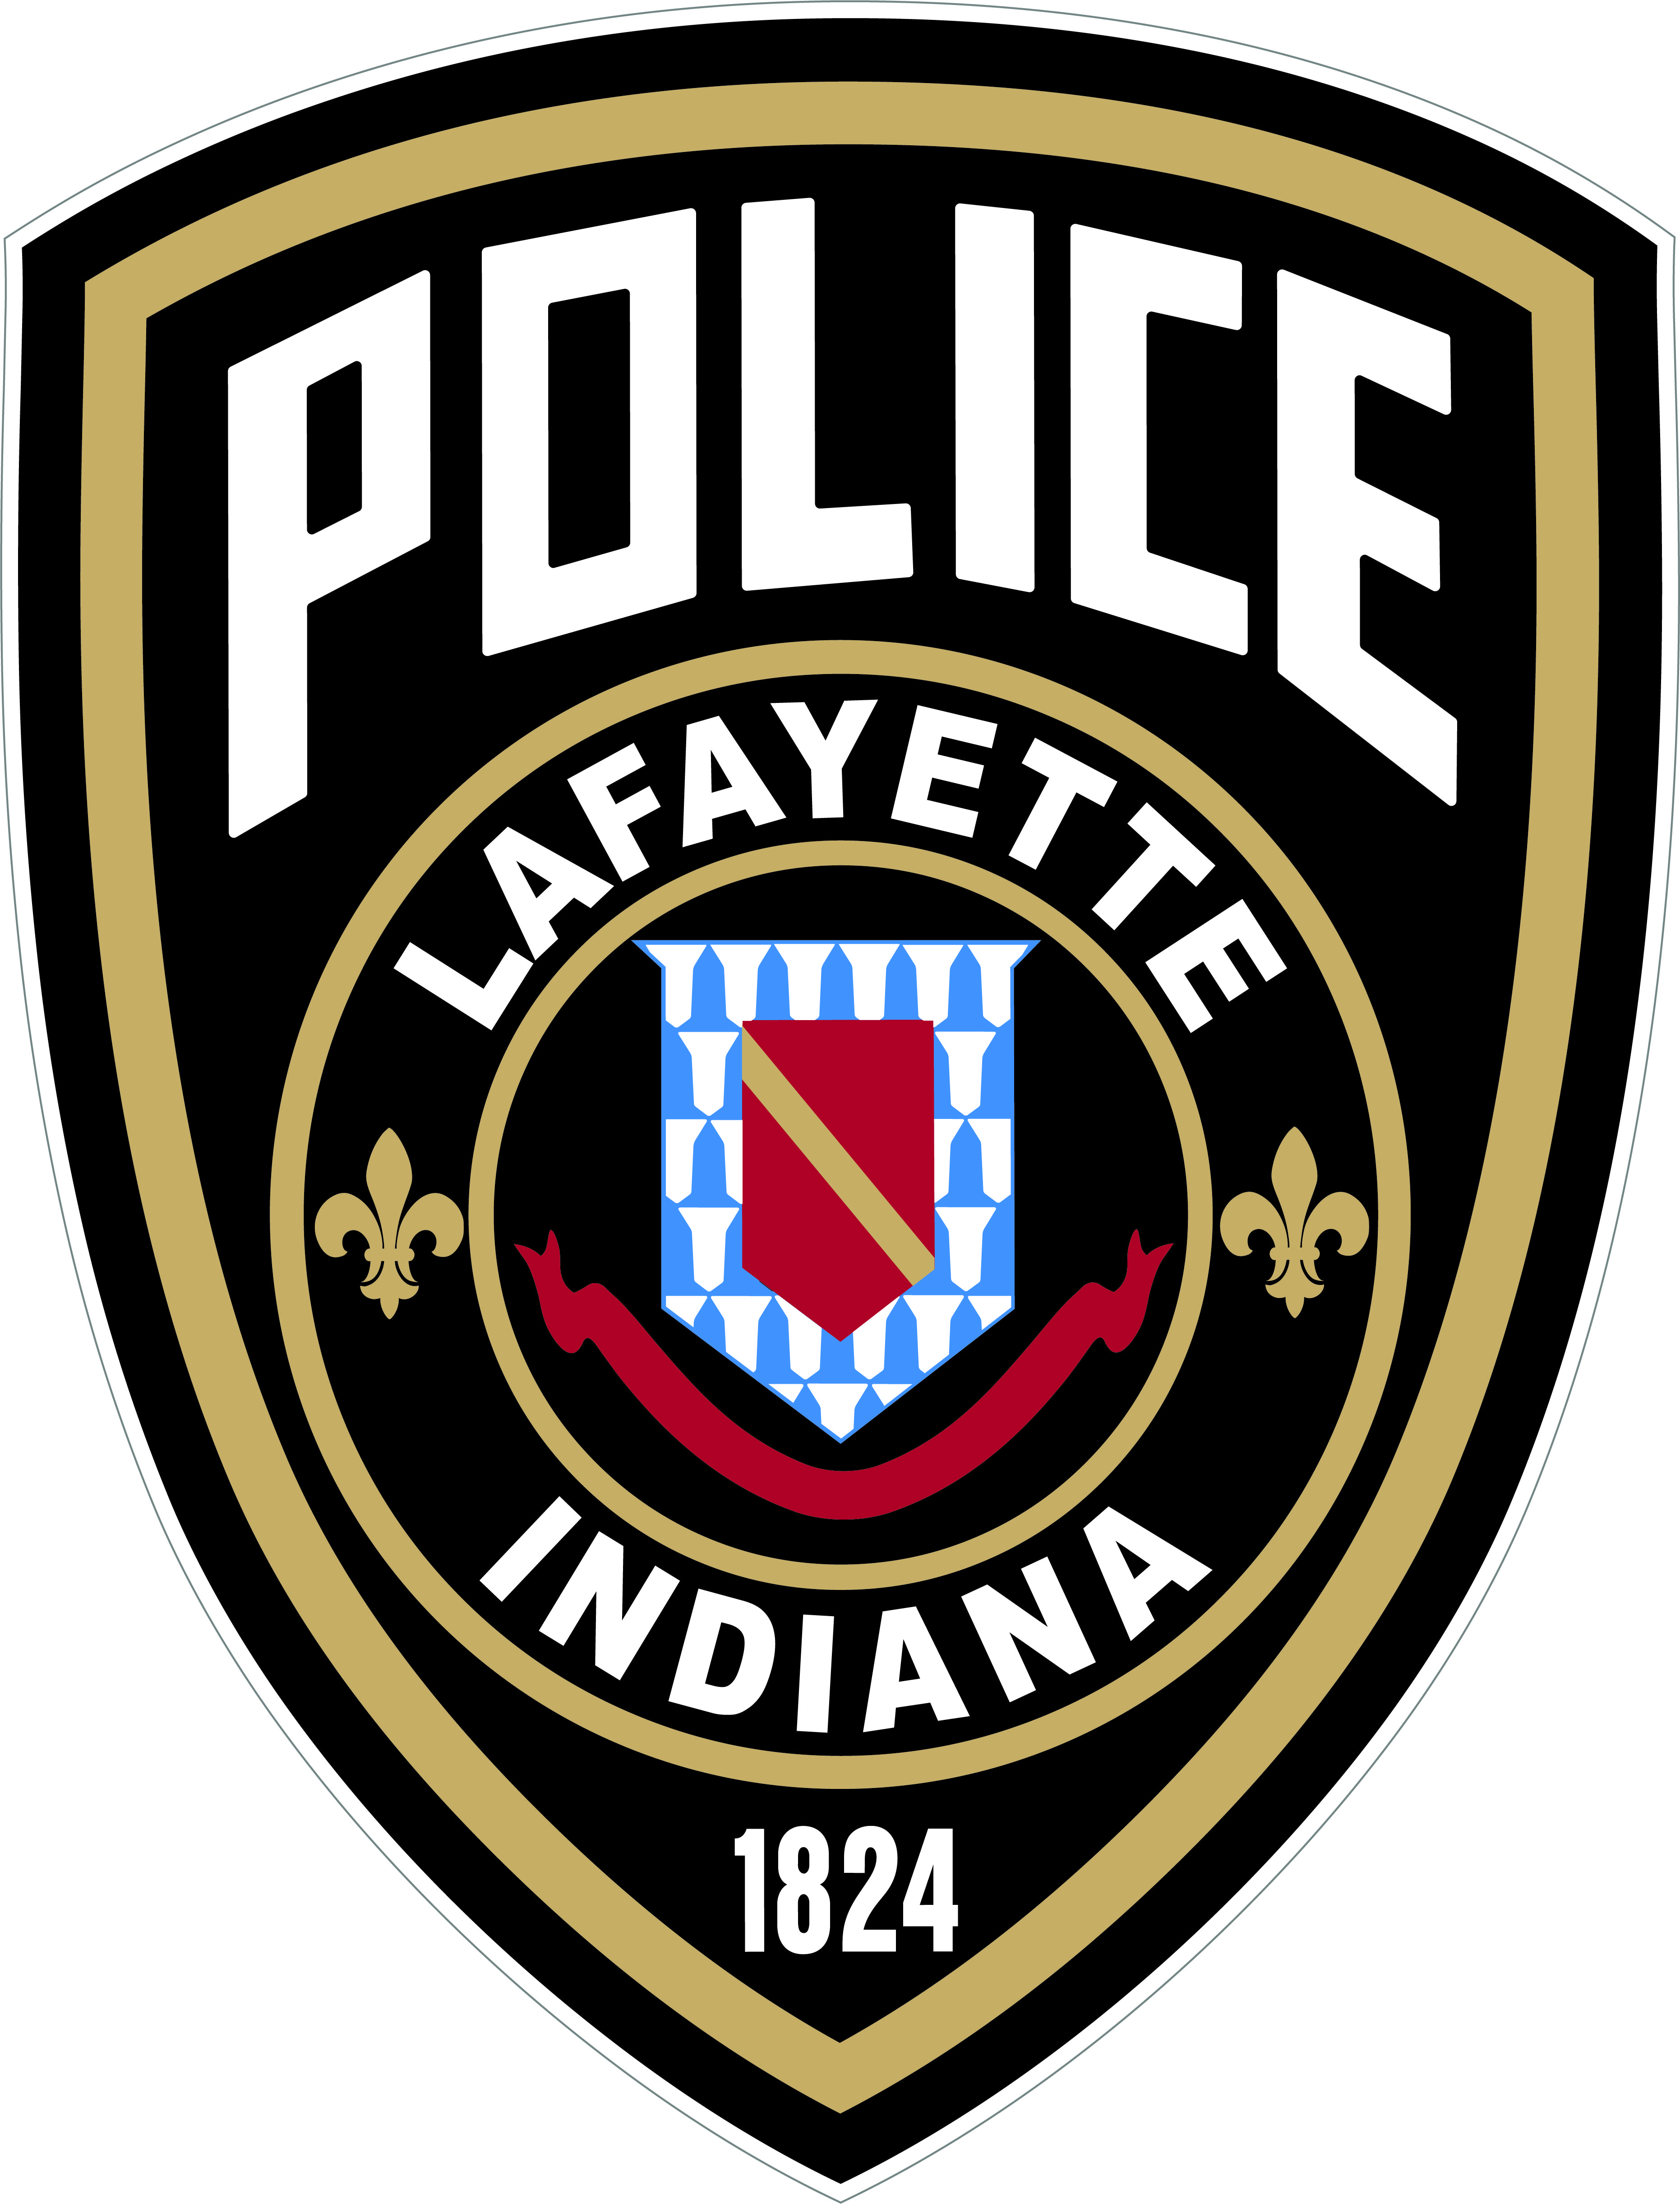 Lafayette Police Department, IN Public Safety Jobs